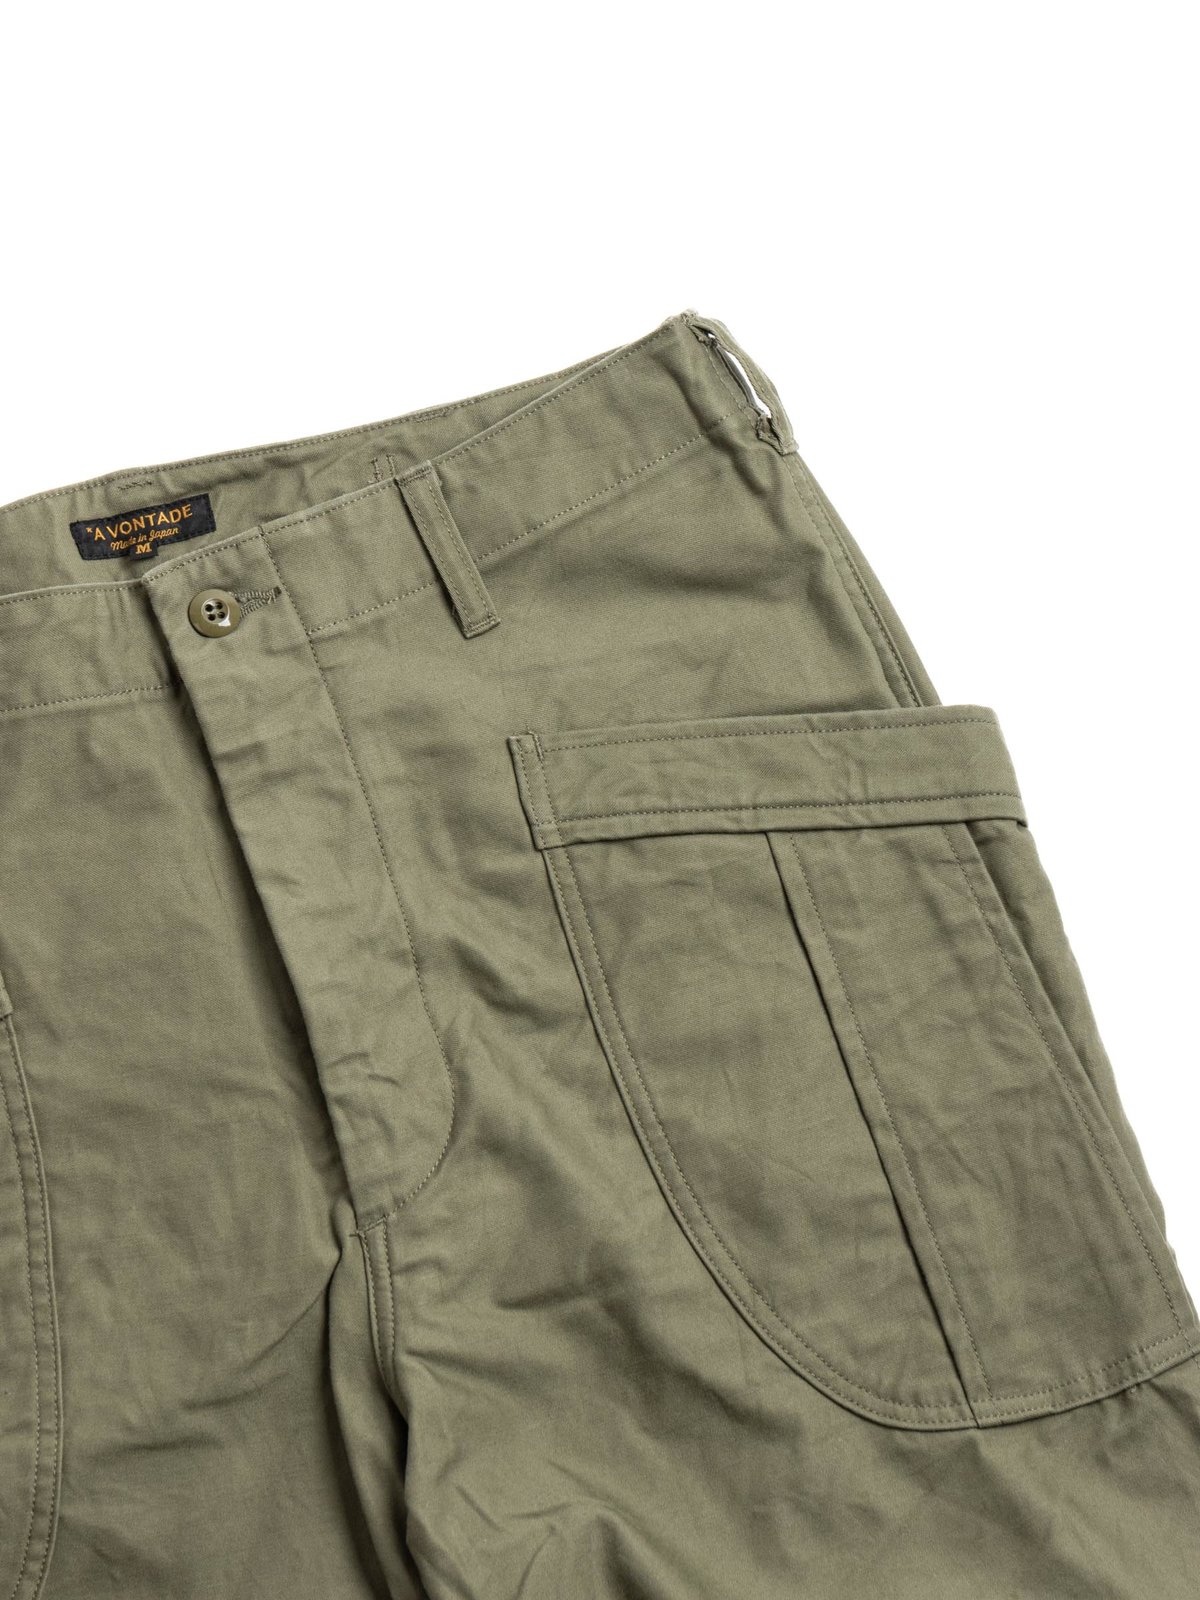 FATIGUE TROUSER OLIVE - Image 2